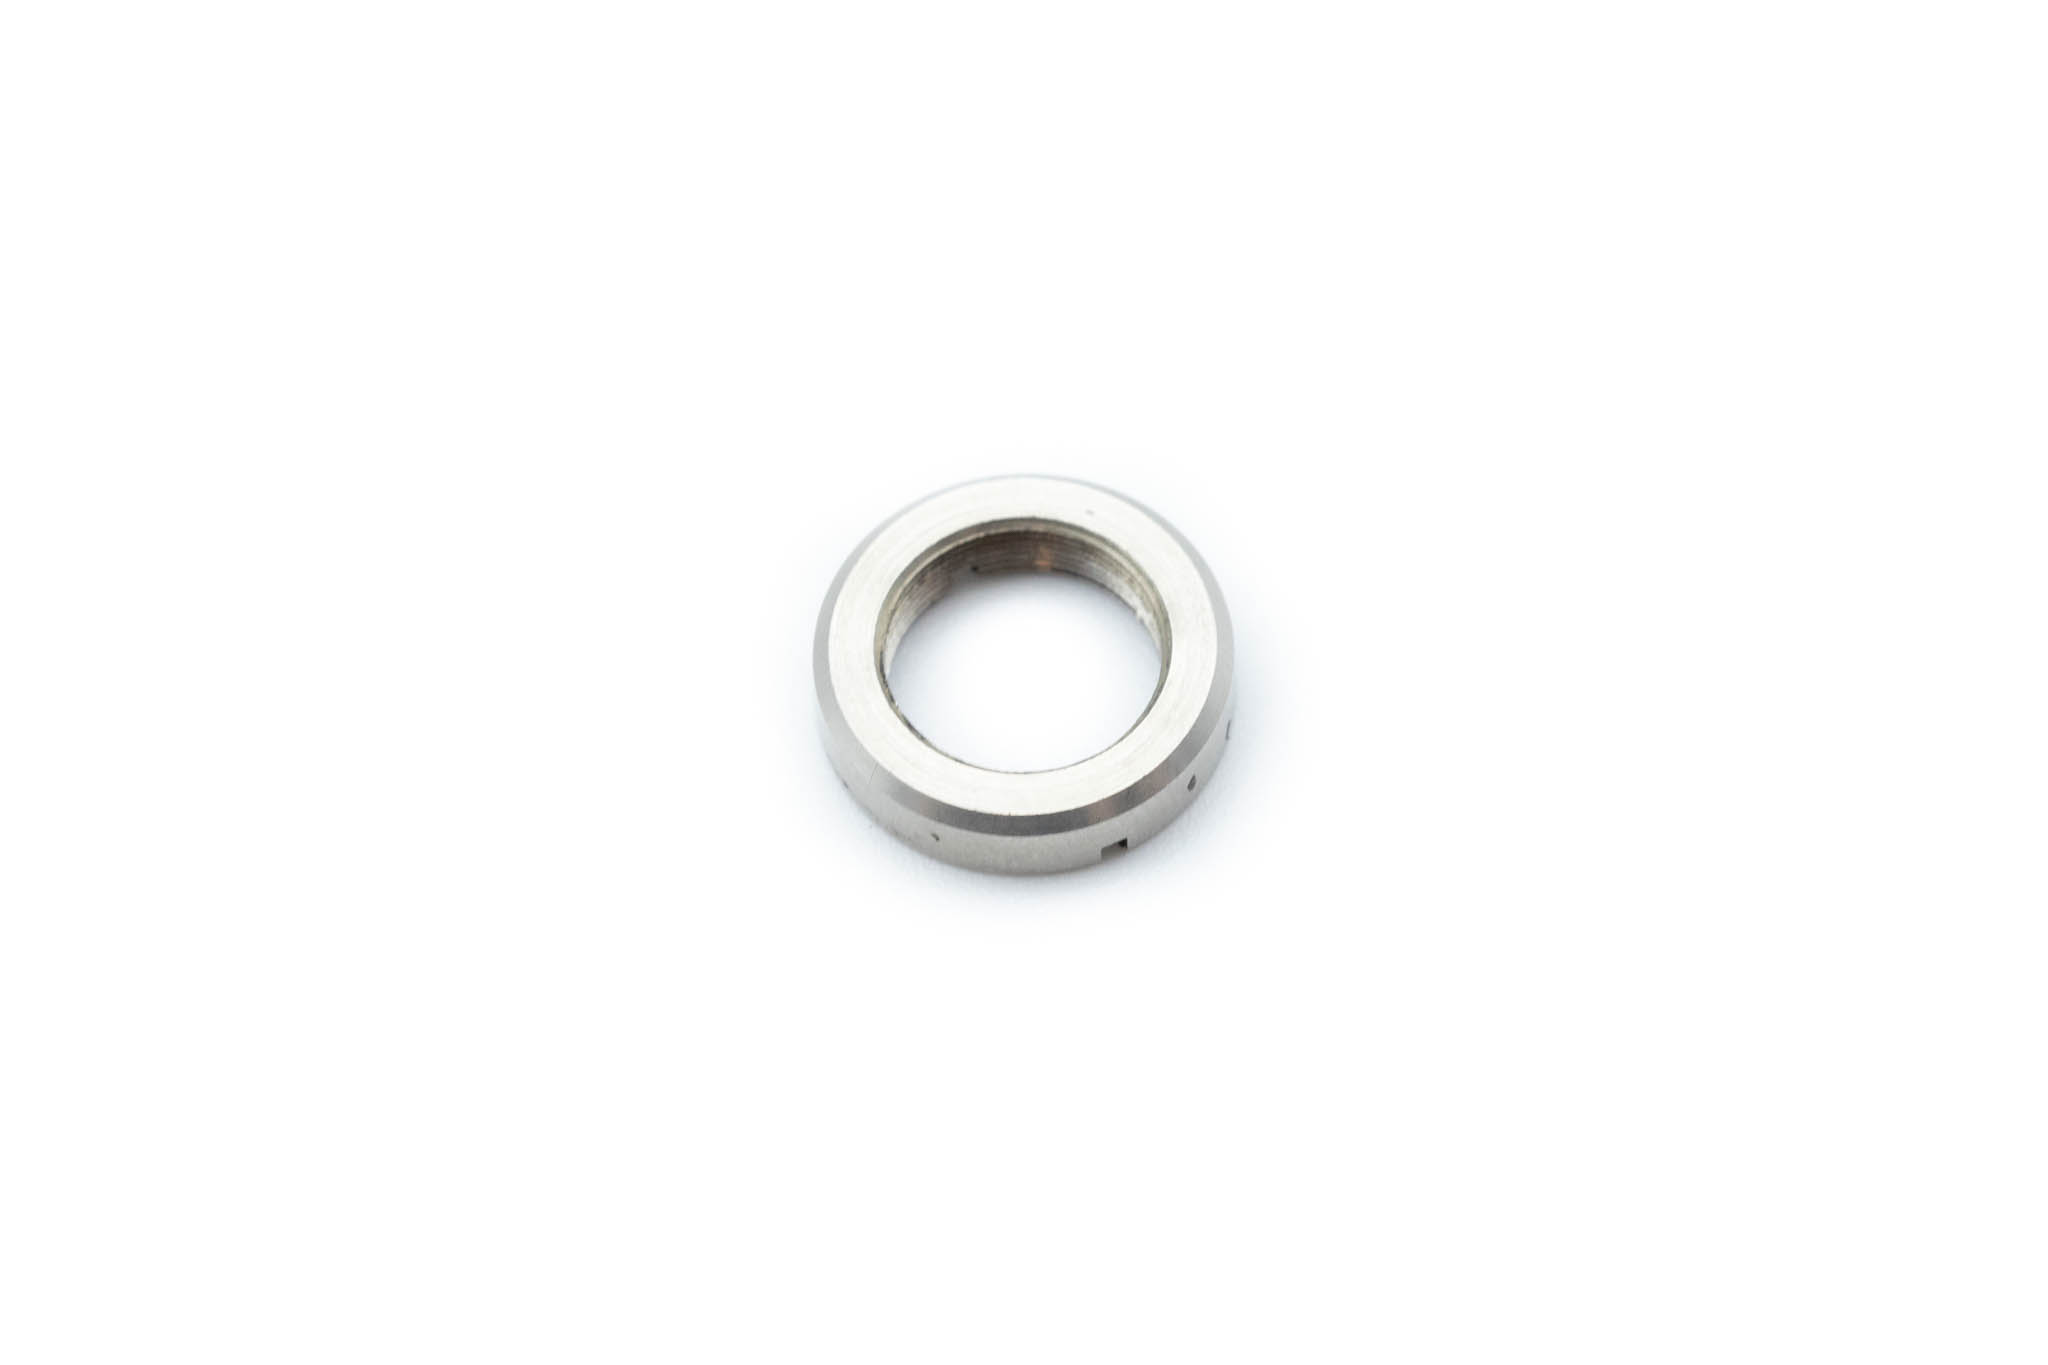 OEM Nut: Insertion Tube Boot - BF-160, BF-1T160, BF-P160, BF-3C160